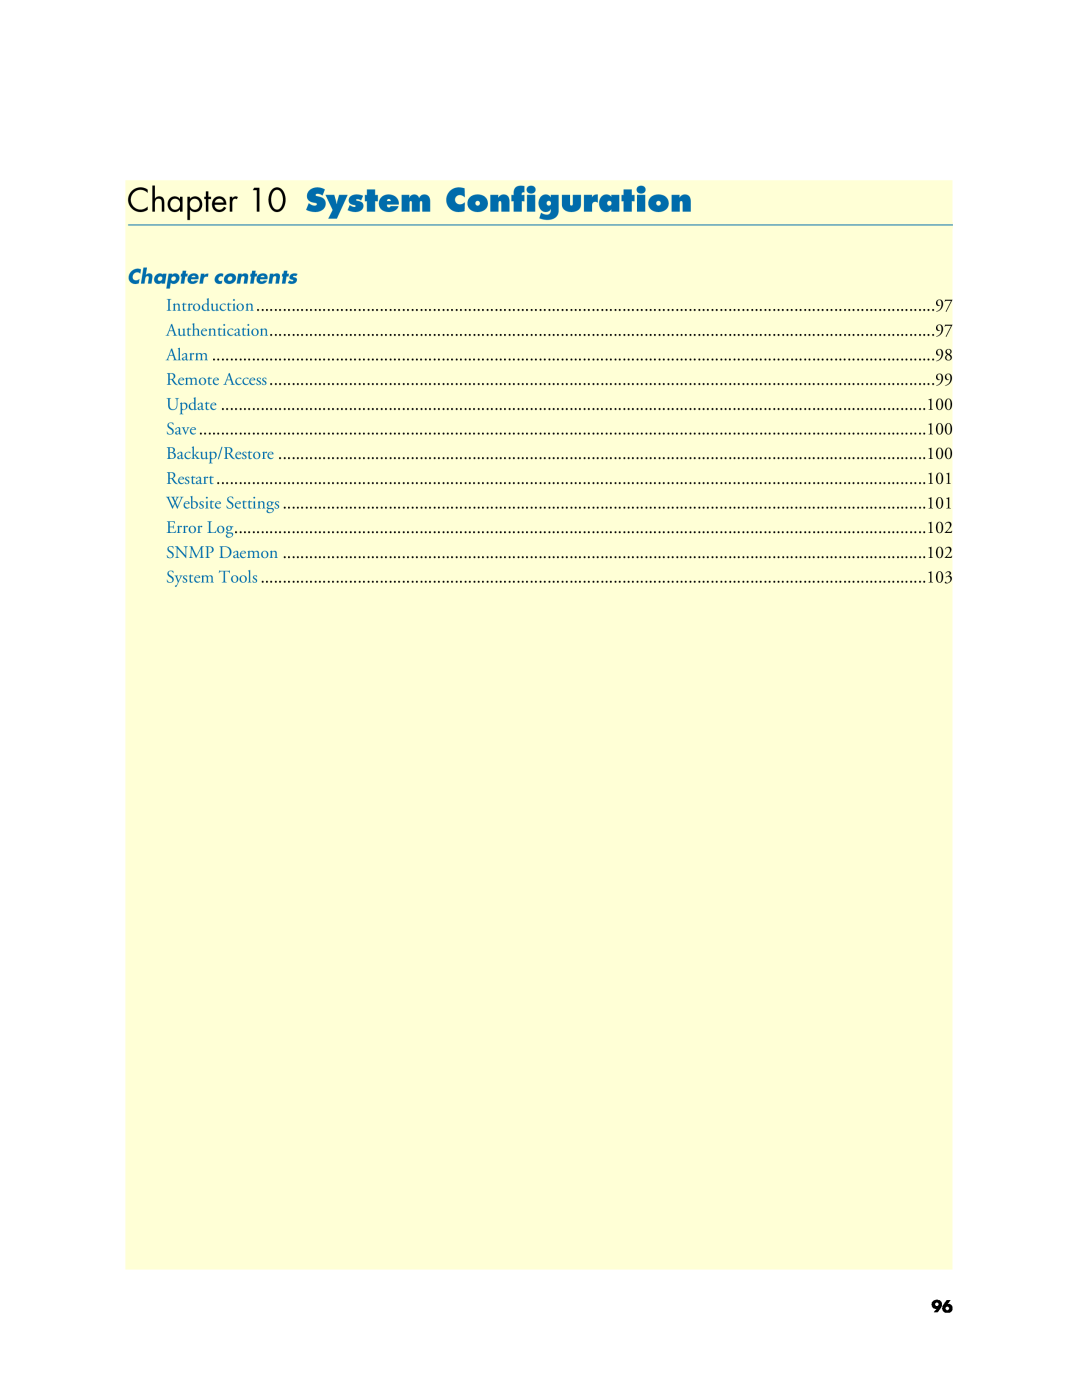 Patton electronic 2621, 2635 manual System Conﬁguration, Chapter contents 